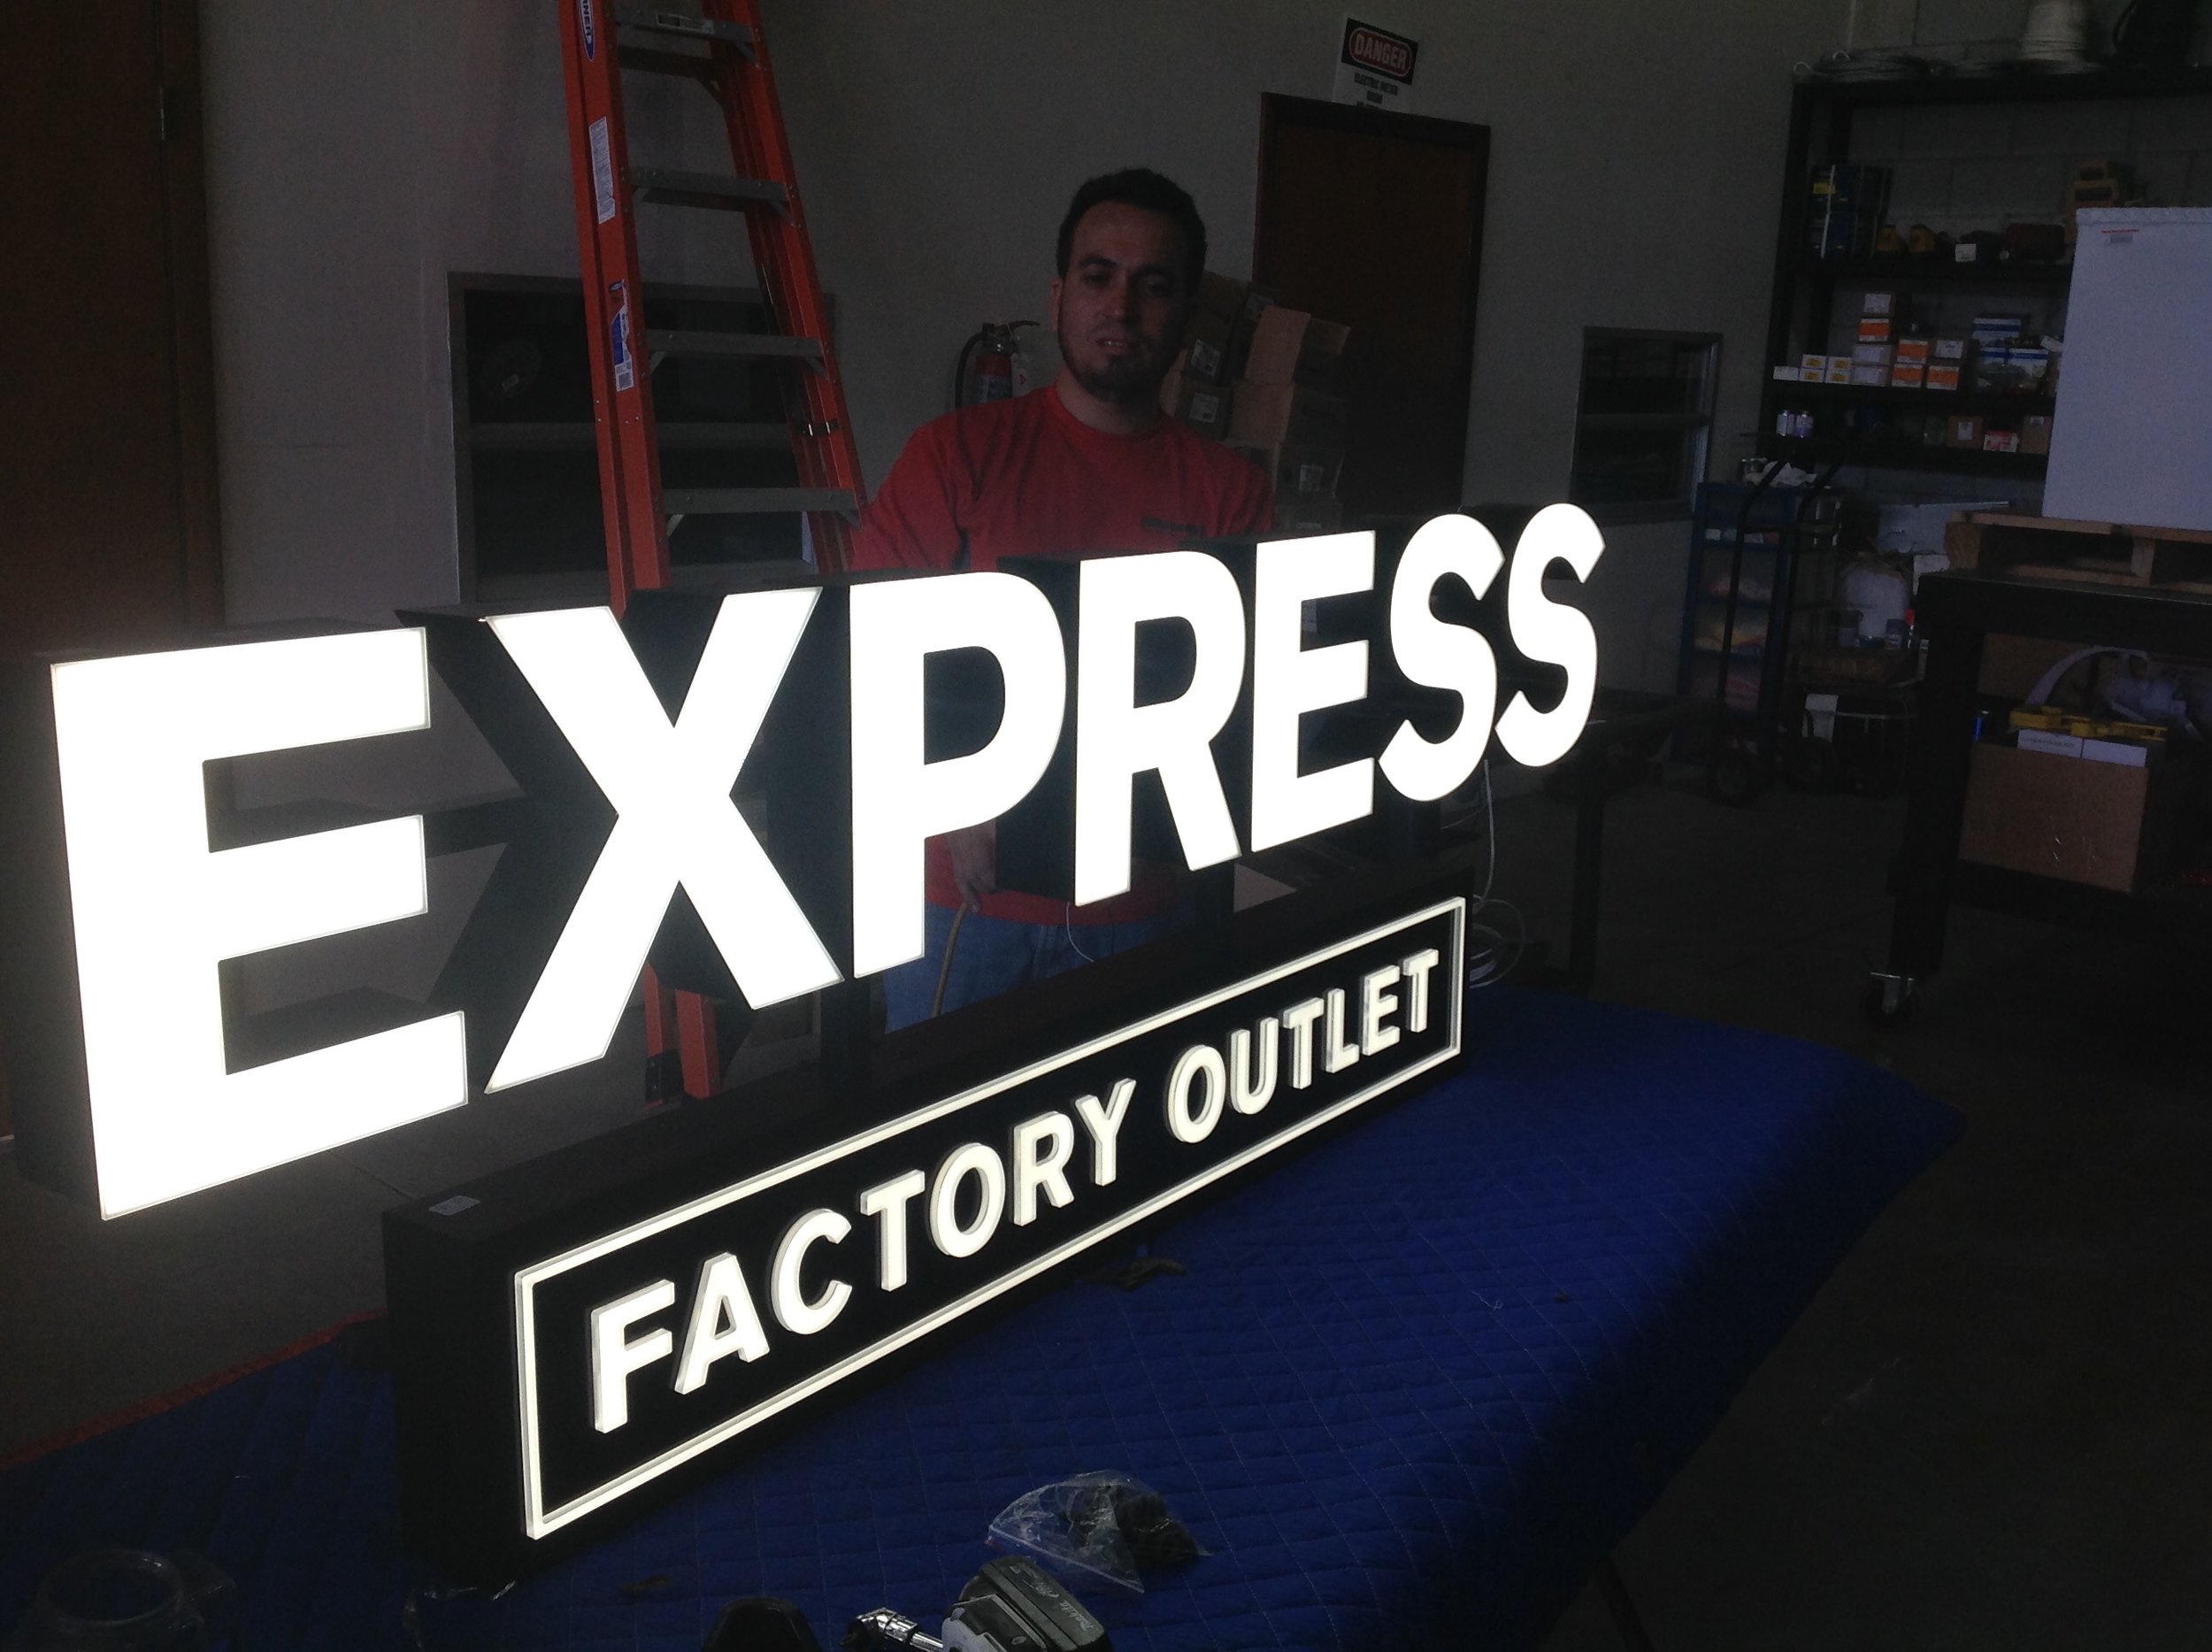 sign installation - express factory outlet.JPG